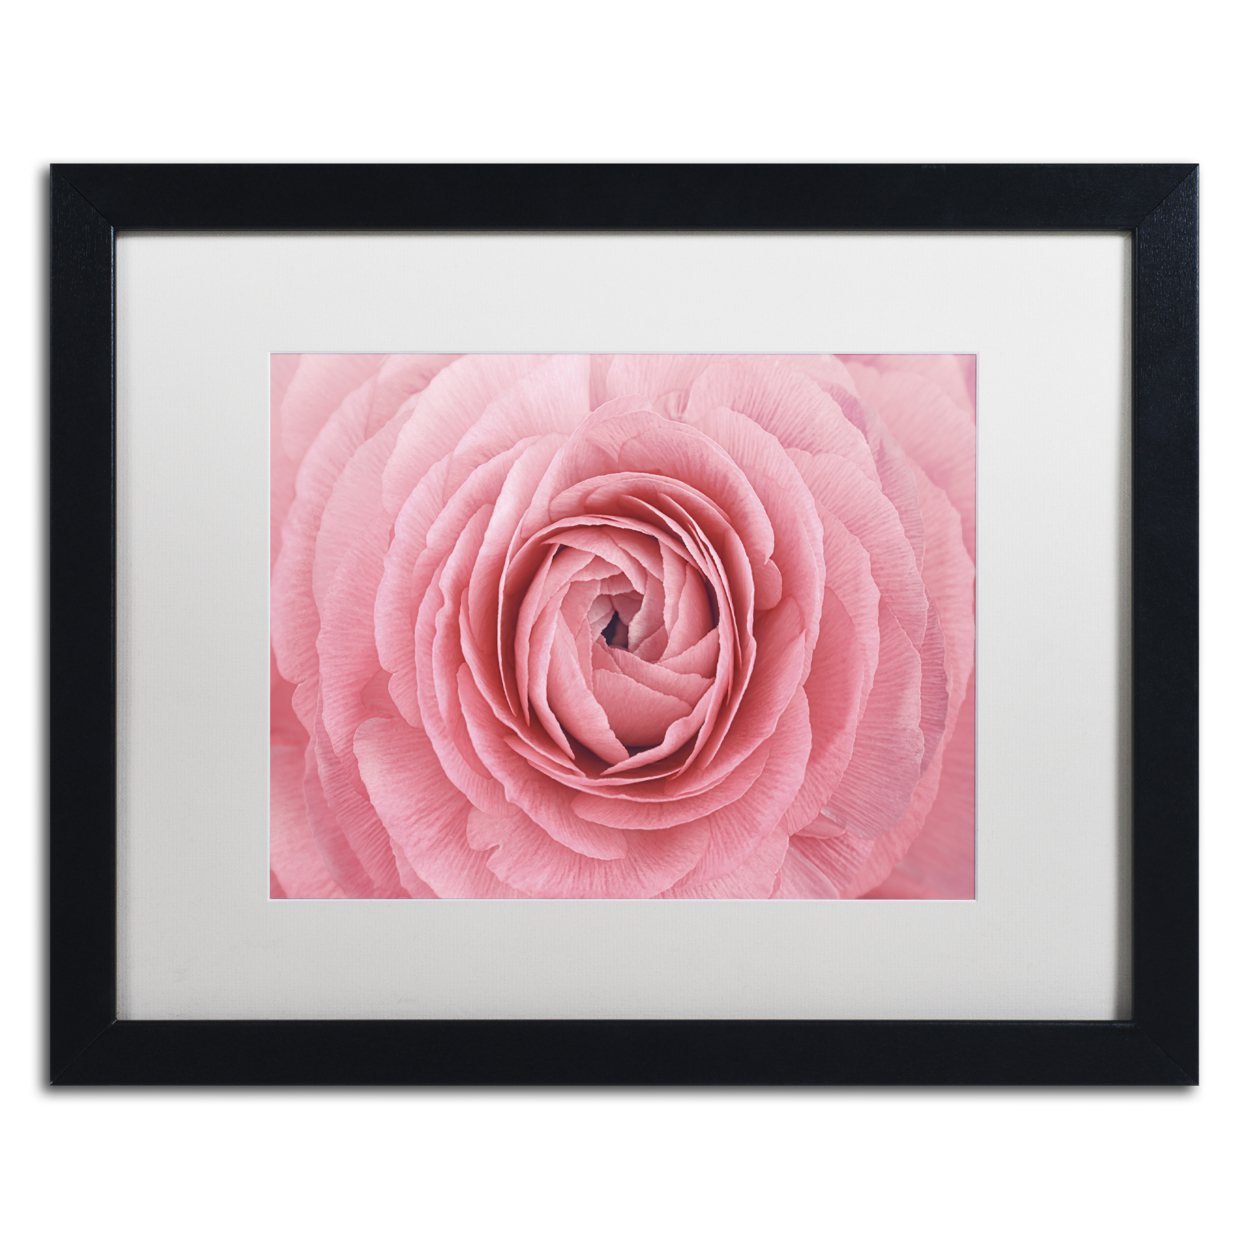 Cora Niele 'Pink Persian Buttercup Flower' Black Wooden Framed Art 18 X 22 Inches